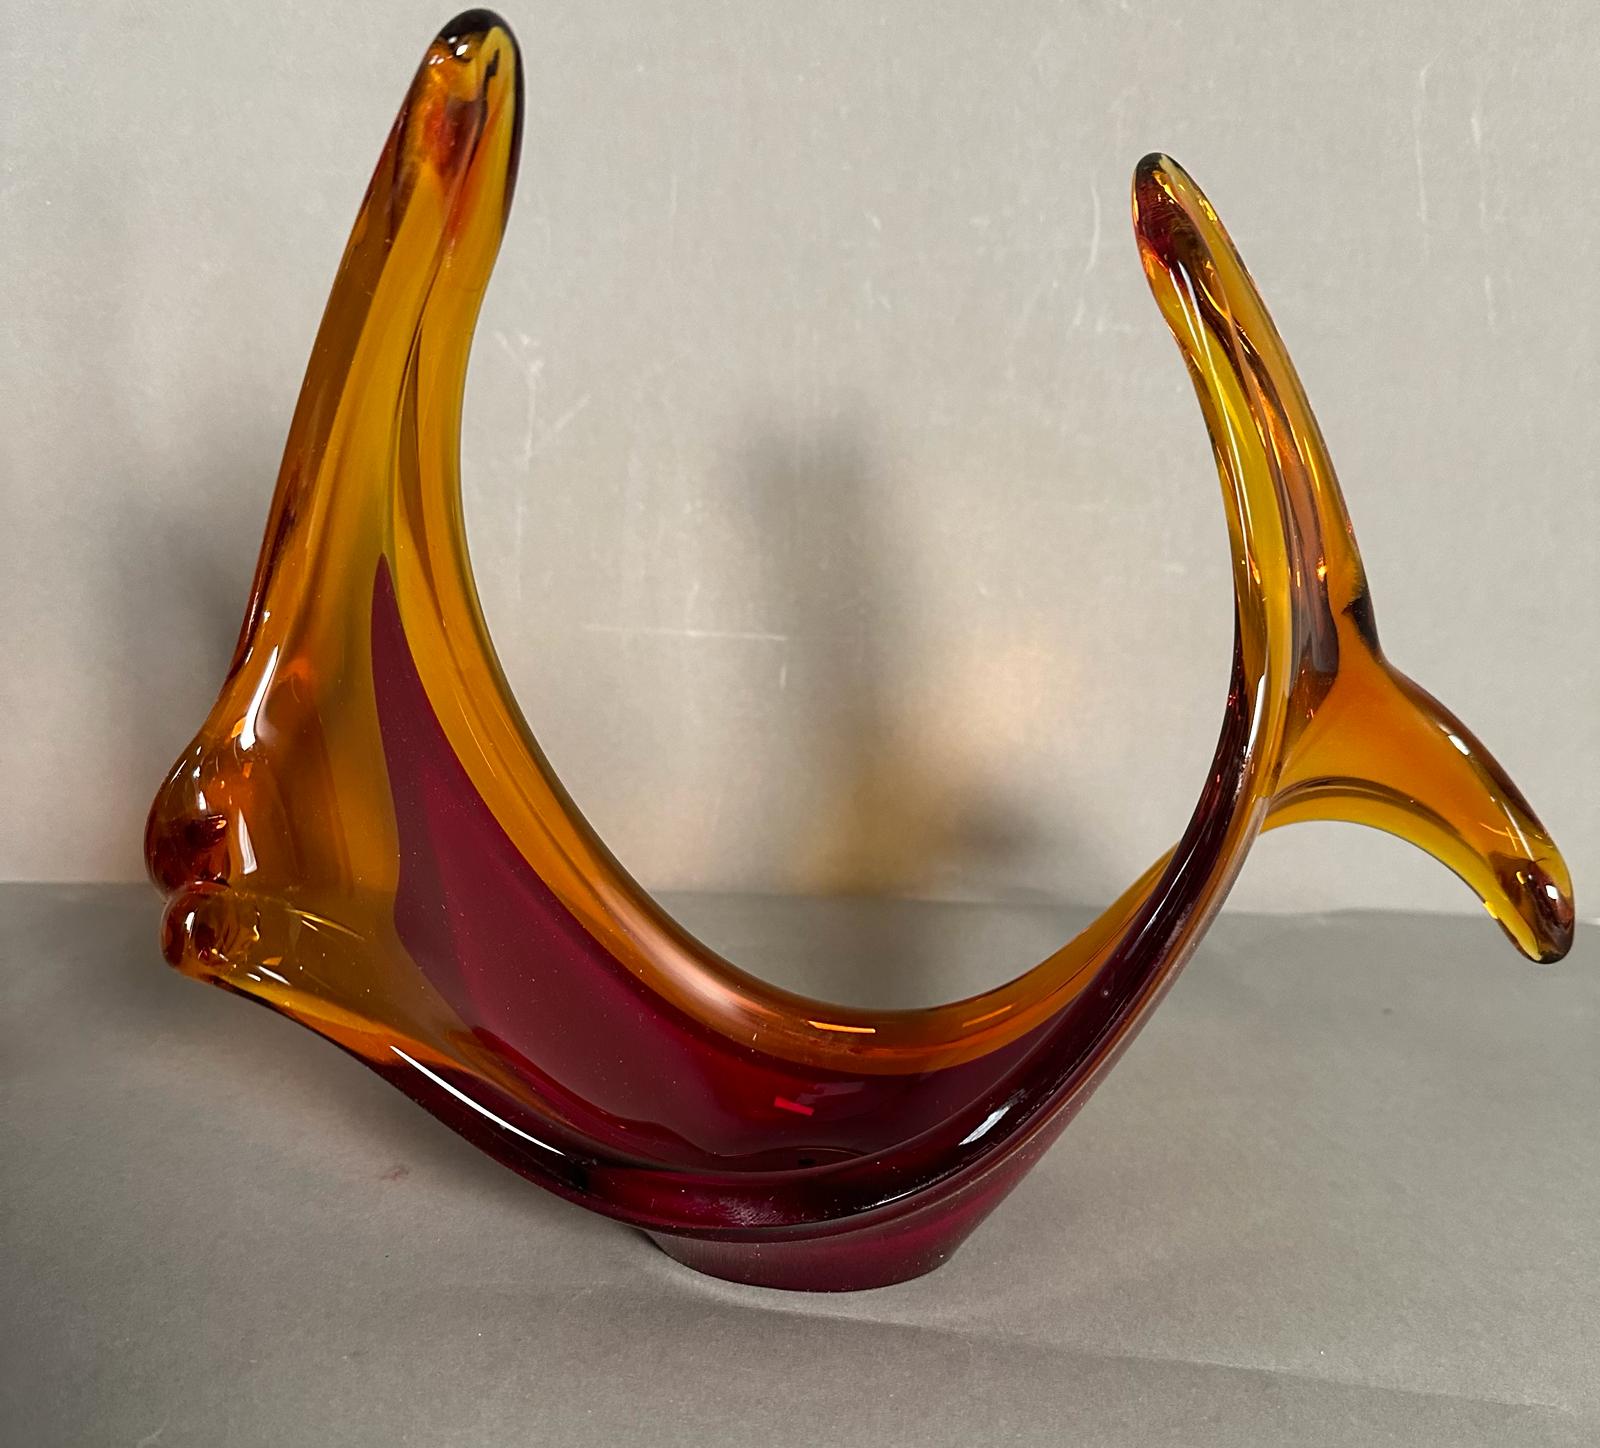 Two contemporary art glass vases in cranberry and yellow - Image 4 of 4